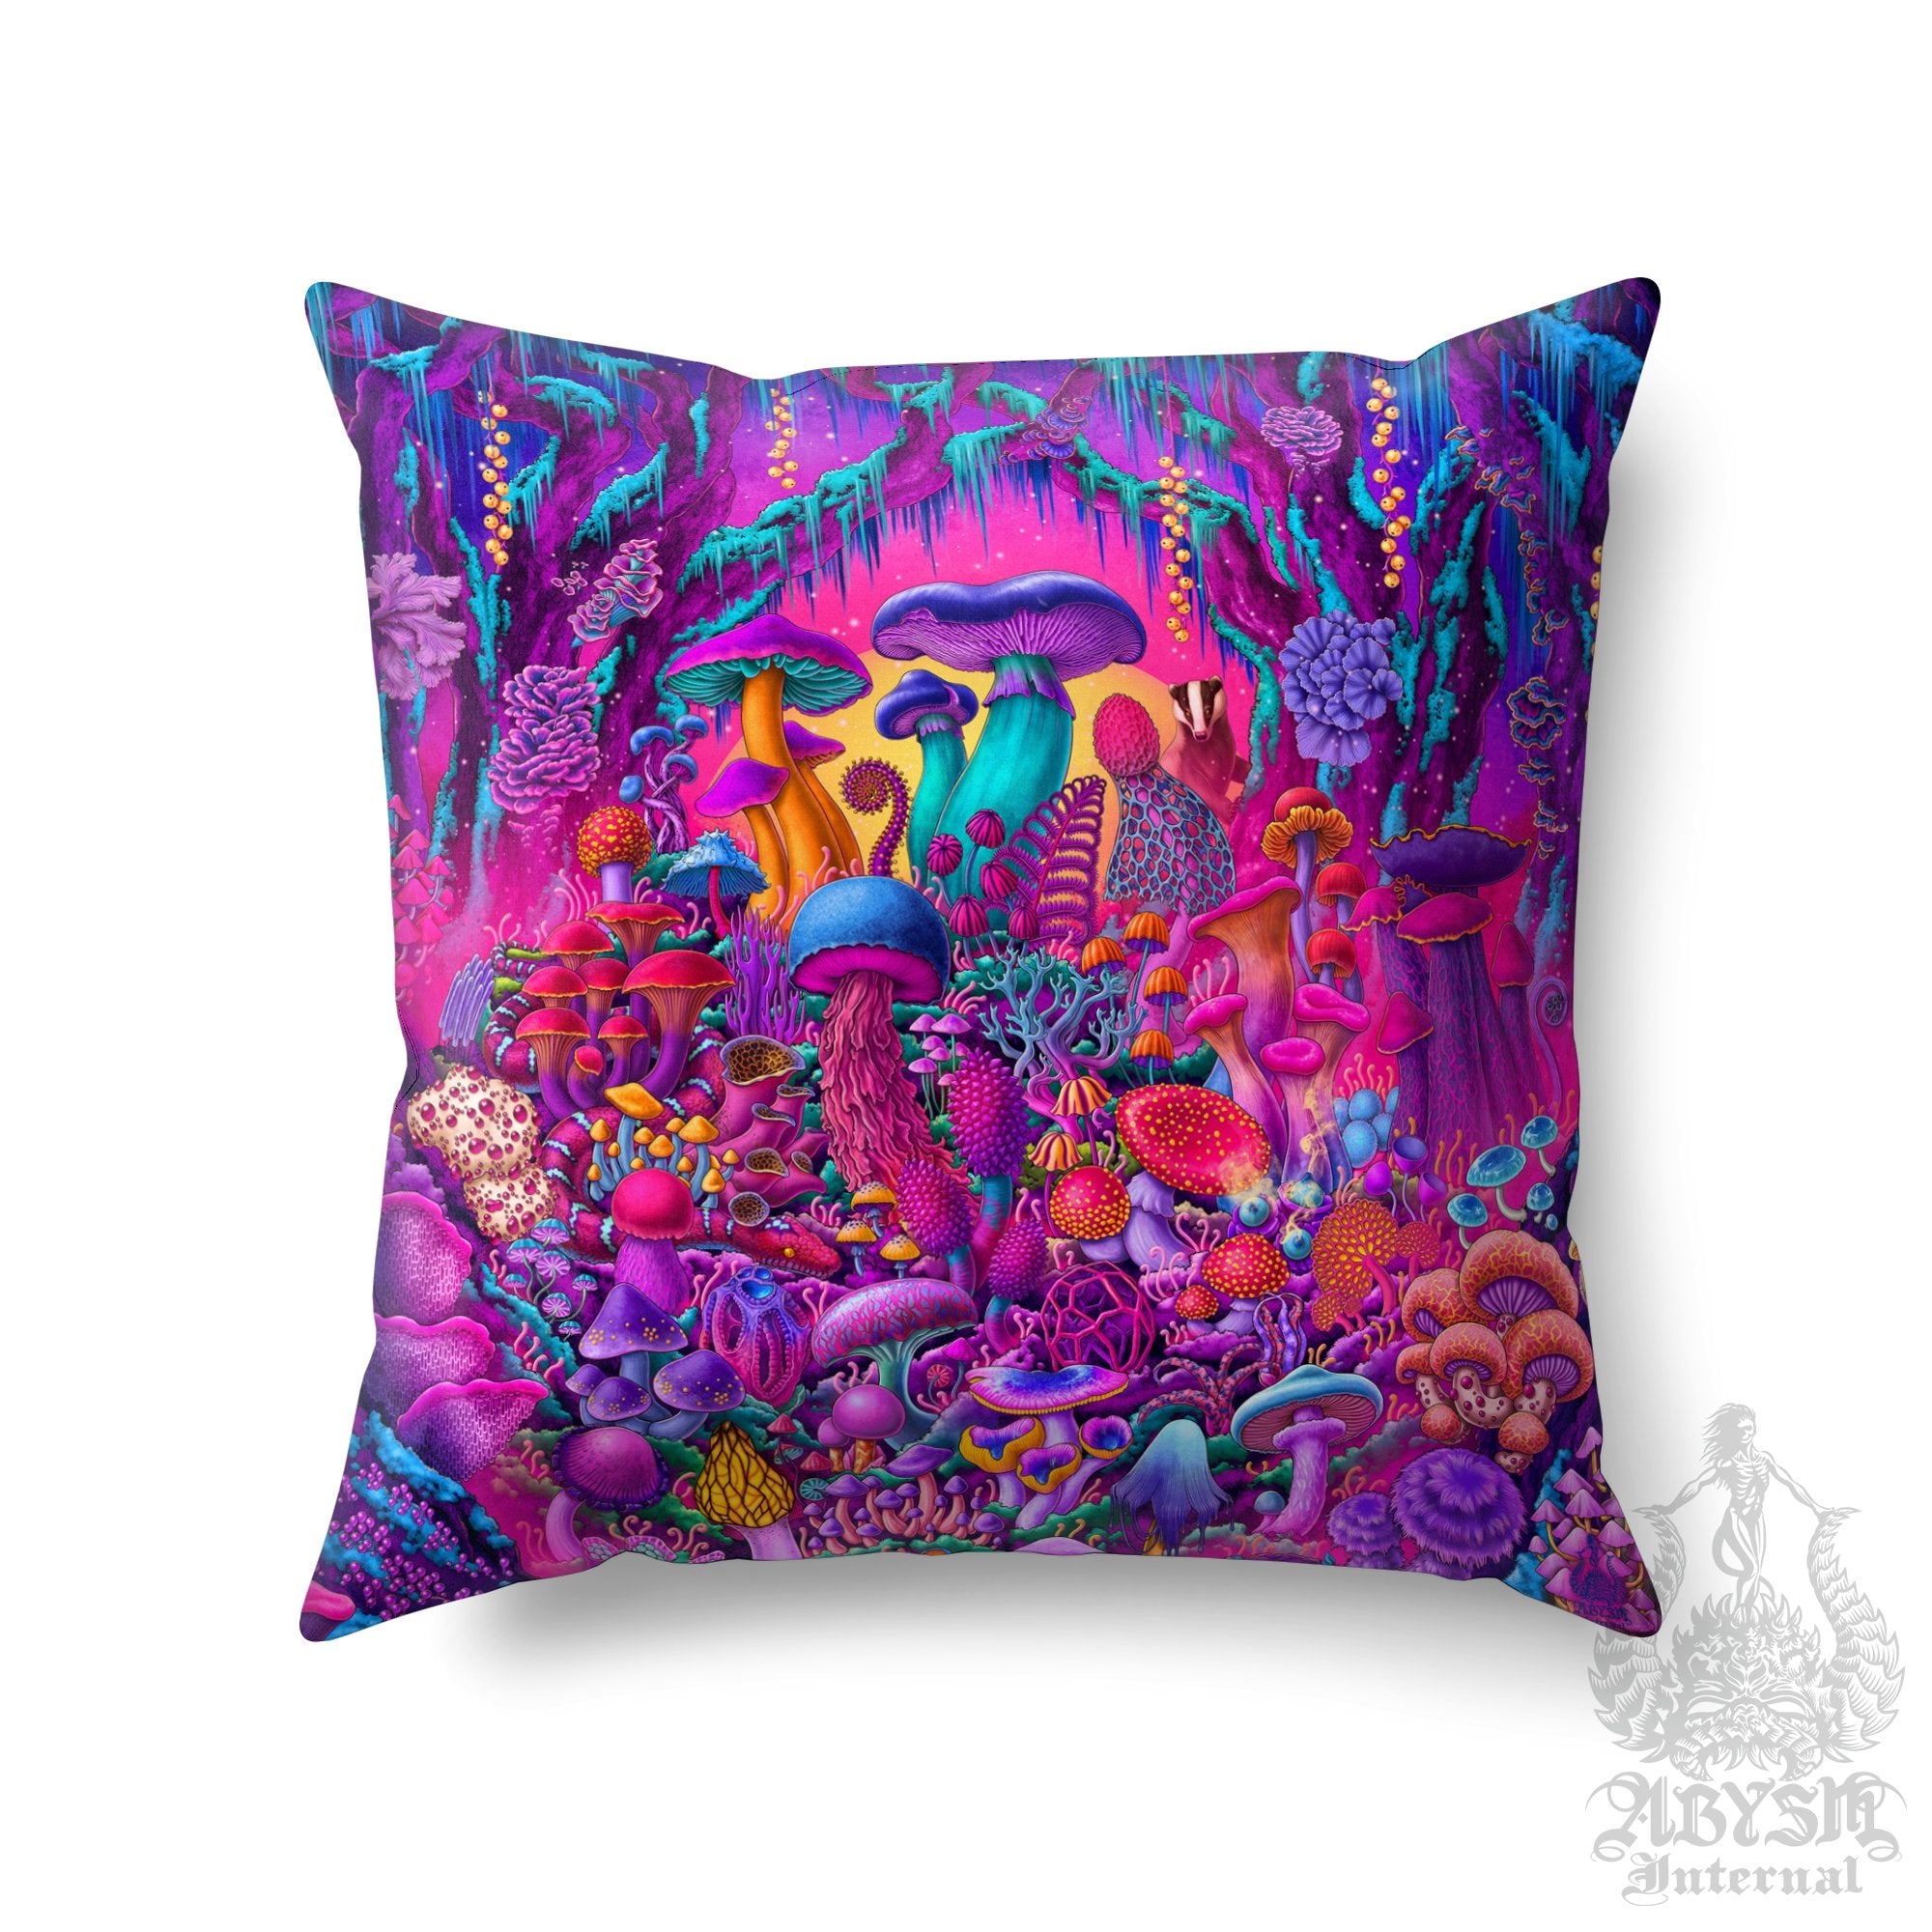 Psychedelic Mushrooms Throw Pillow, Magic Shrooms, Vaporwave Decorative Accent Cushion, Retrowave 80s Room Decor, Synthwave Art Print - Abysm Internal